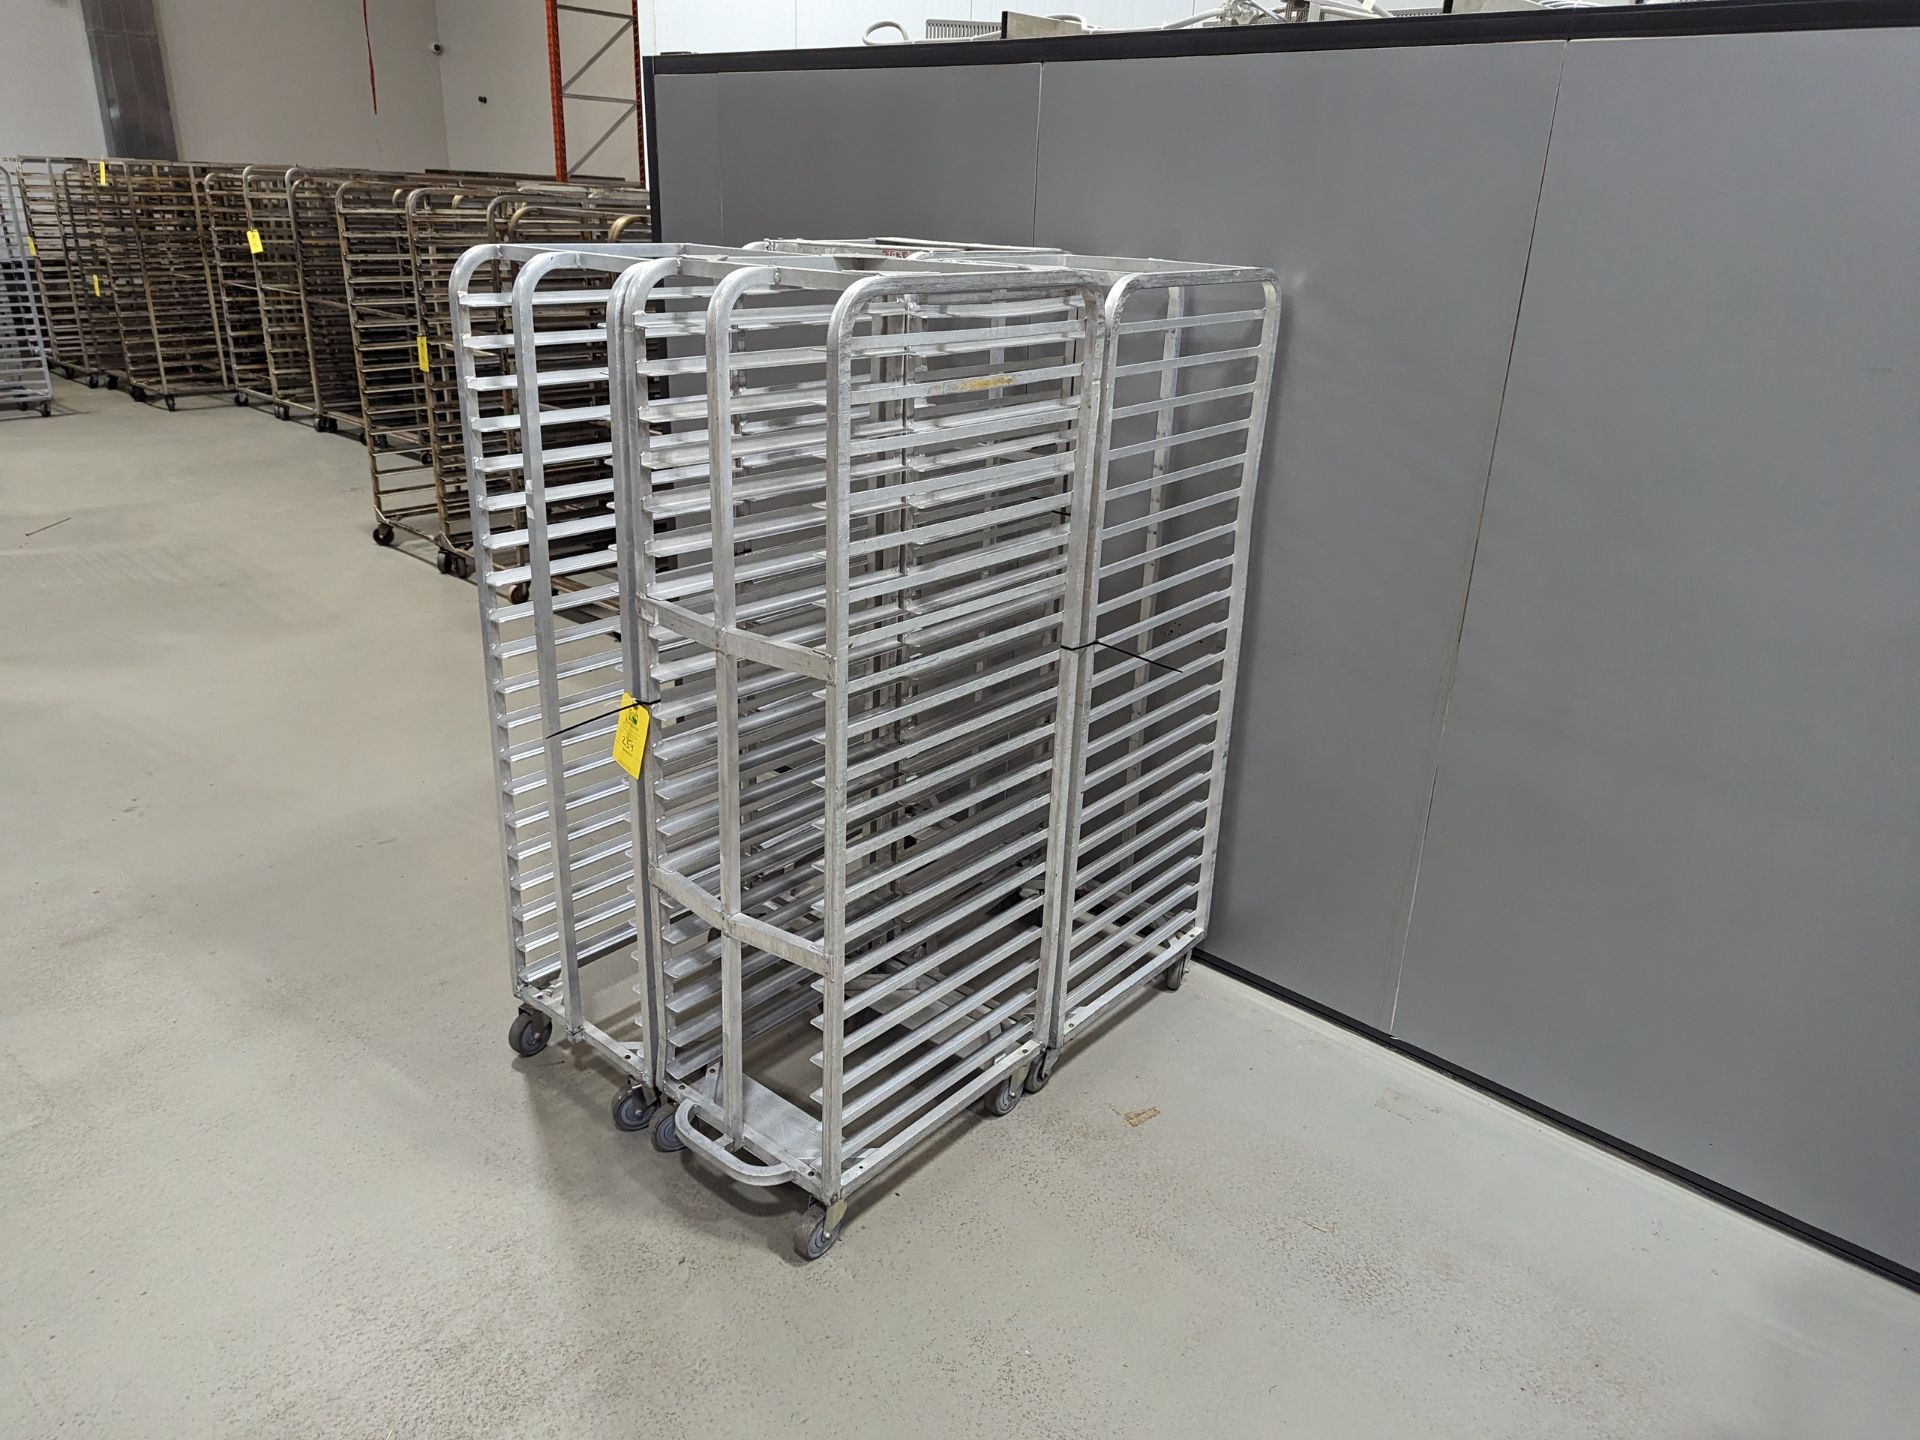 Lot of 4 Single Wide Aluminum Bakery Racks, Dimensions LxWxH: 53x41x69 Measurements are for lot of - Image 2 of 6